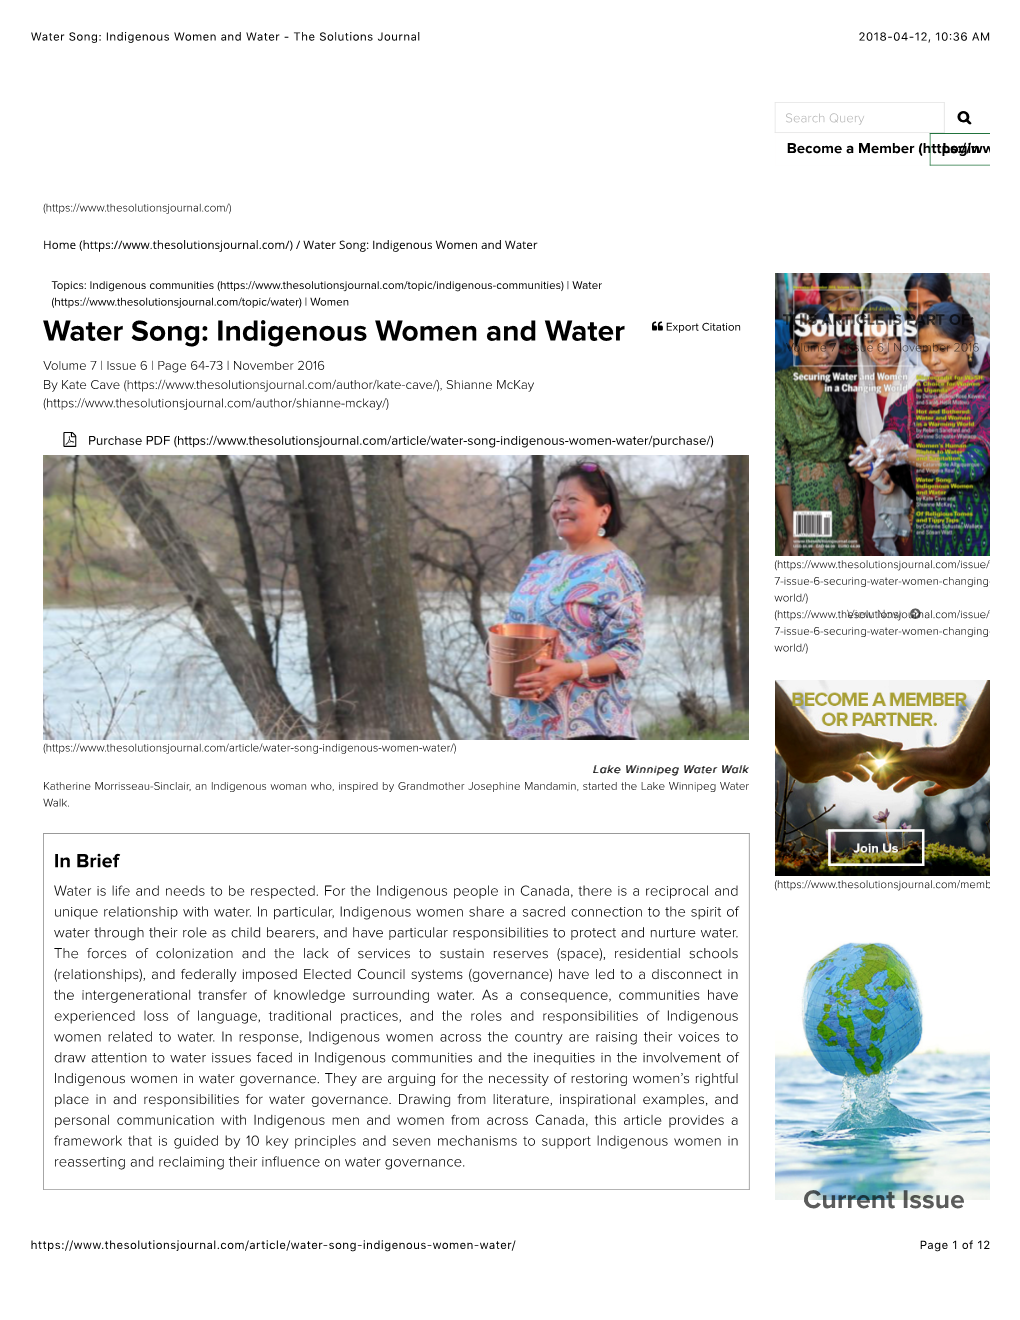 Water Song: Indigenous Women and Water - the Solutions Journal 2018-04-12, 10�36 AM